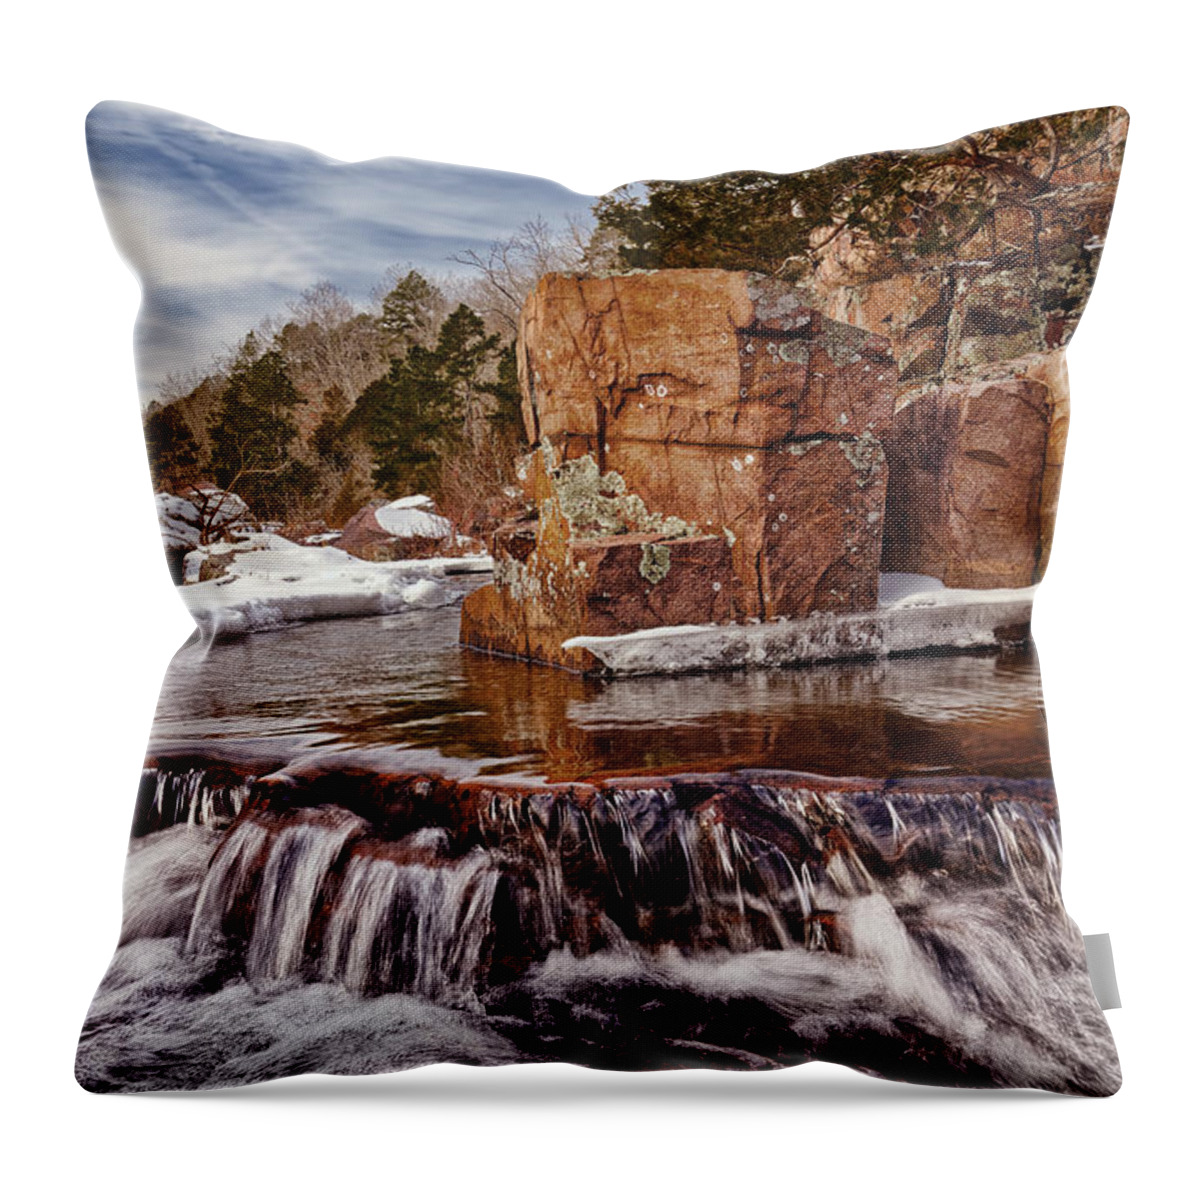 Water Throw Pillow featuring the photograph Lower Rock Creek by Robert Charity